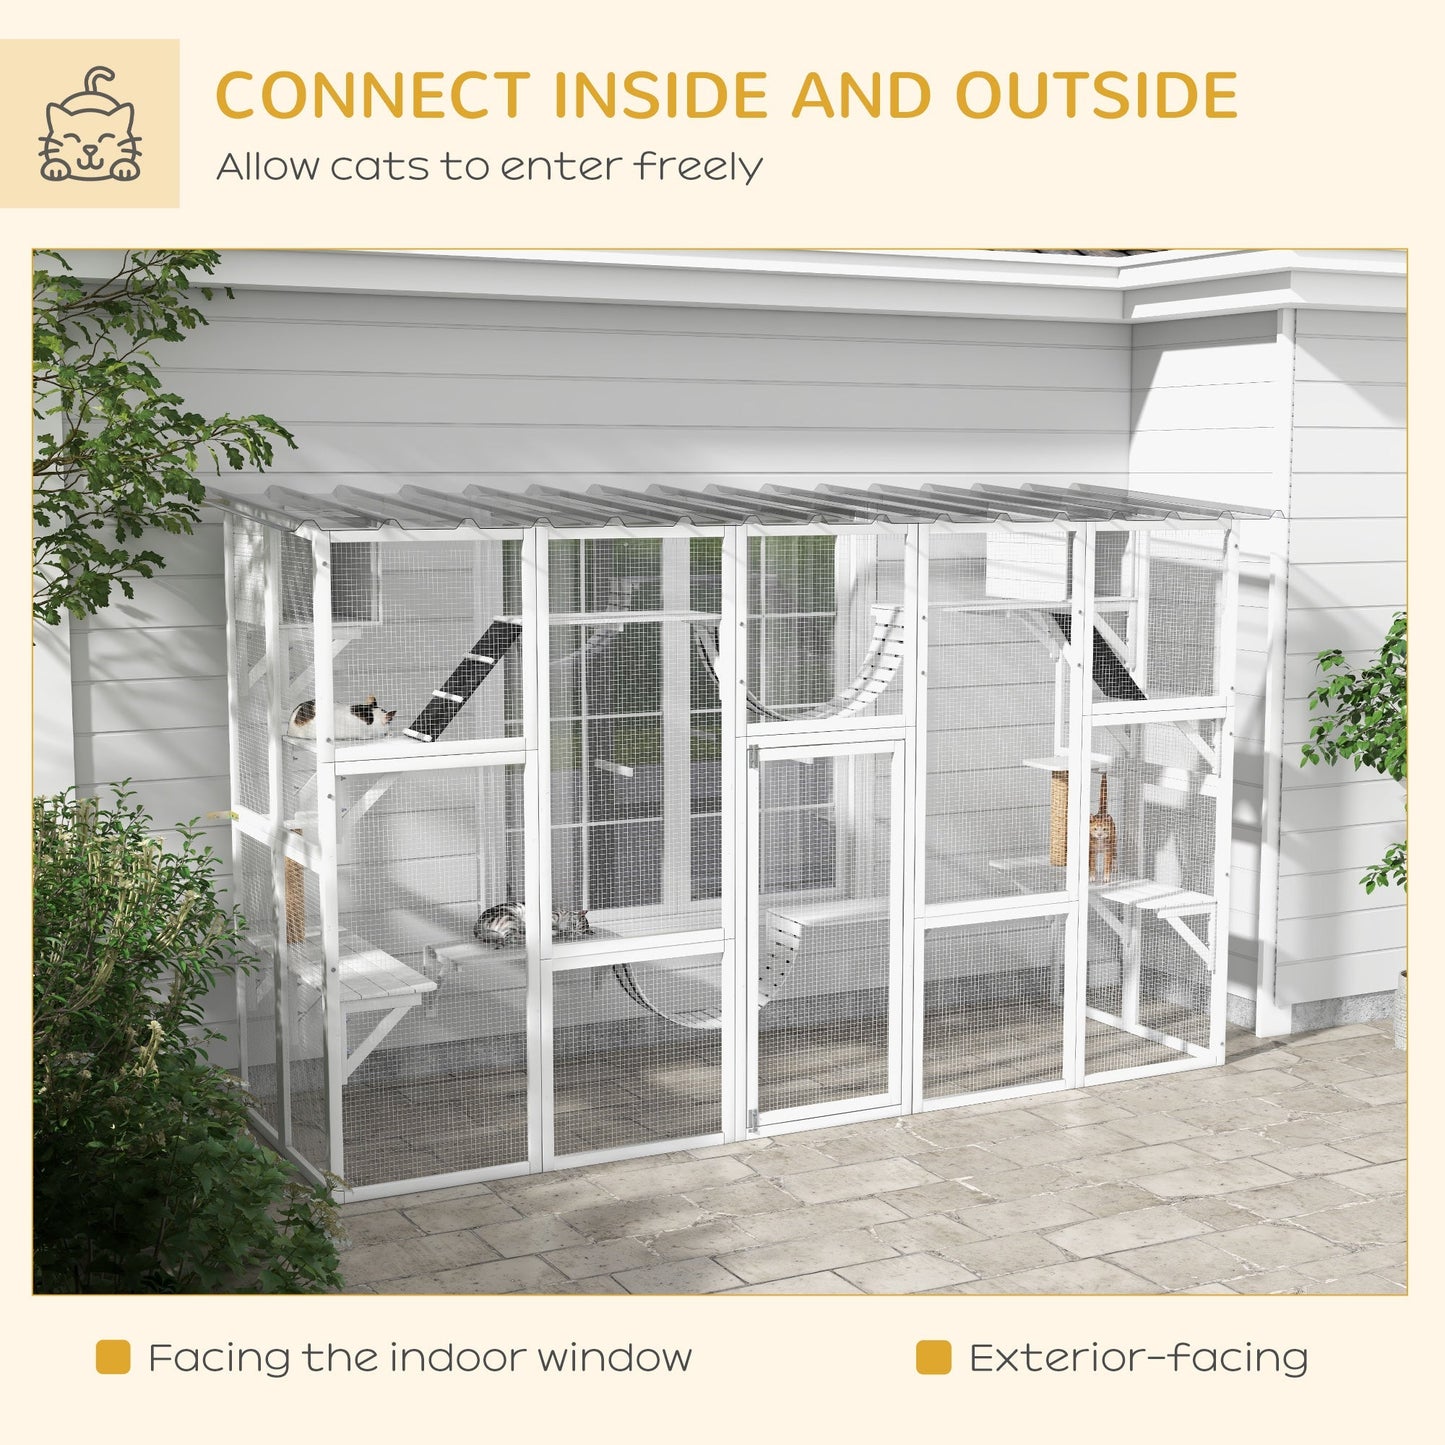 Large Outdoor Catio with Condos, Platforms, Doors, Ladders, Weather-Resistant Roof, White at Gallery Canada